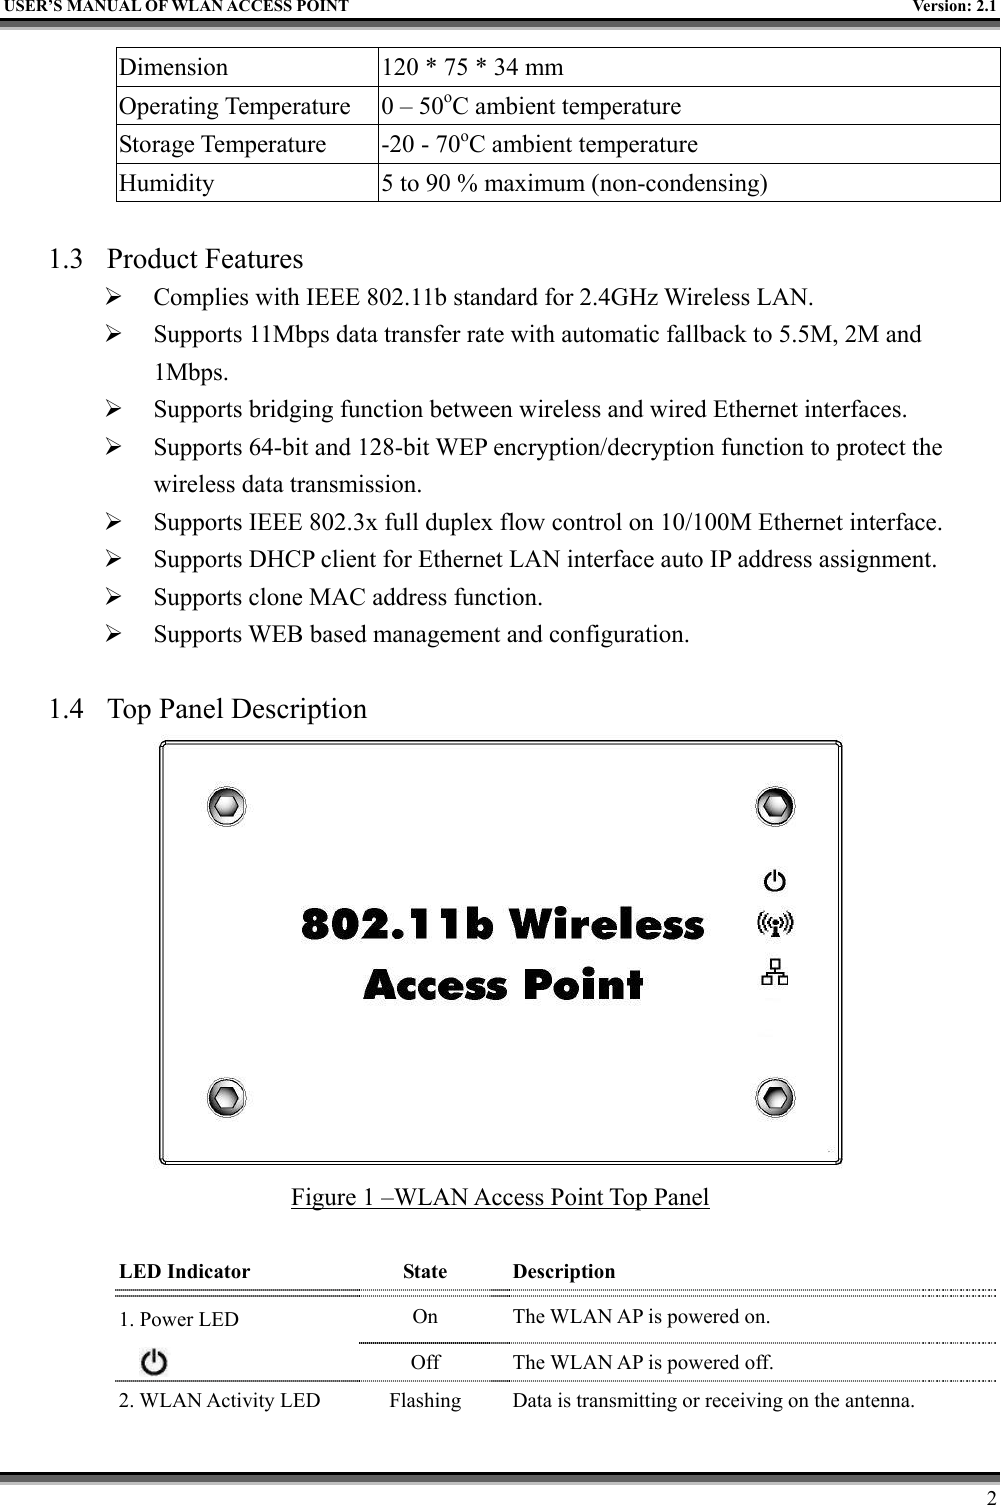   USER’S MANUAL OF WLAN ACCESS POINT    Version: 2.1     2 Dimension  120 * 75 * 34 mm Operating Temperature  0 – 50oC ambient temperature Storage Temperature  -20 - 70oC ambient temperature Humidity  5 to 90 % maximum (non-condensing)  1.3 Product Features   Complies with IEEE 802.11b standard for 2.4GHz Wireless LAN.   Supports 11Mbps data transfer rate with automatic fallback to 5.5M, 2M and 1Mbps.    Supports bridging function between wireless and wired Ethernet interfaces.   Supports 64-bit and 128-bit WEP encryption/decryption function to protect the wireless data transmission.   Supports IEEE 802.3x full duplex flow control on 10/100M Ethernet interface.   Supports DHCP client for Ethernet LAN interface auto IP address assignment.   Supports clone MAC address function.   Supports WEB based management and configuration.  1.4  Top Panel Description  Figure 1 –WLAN Access Point Top Panel  LED Indicator    State  Description 1. Power LED      On  The WLAN AP is powered on.    Off  The WLAN AP is powered off. 2. WLAN Activity LED    Flashing  Data is transmitting or receiving on the antenna. 